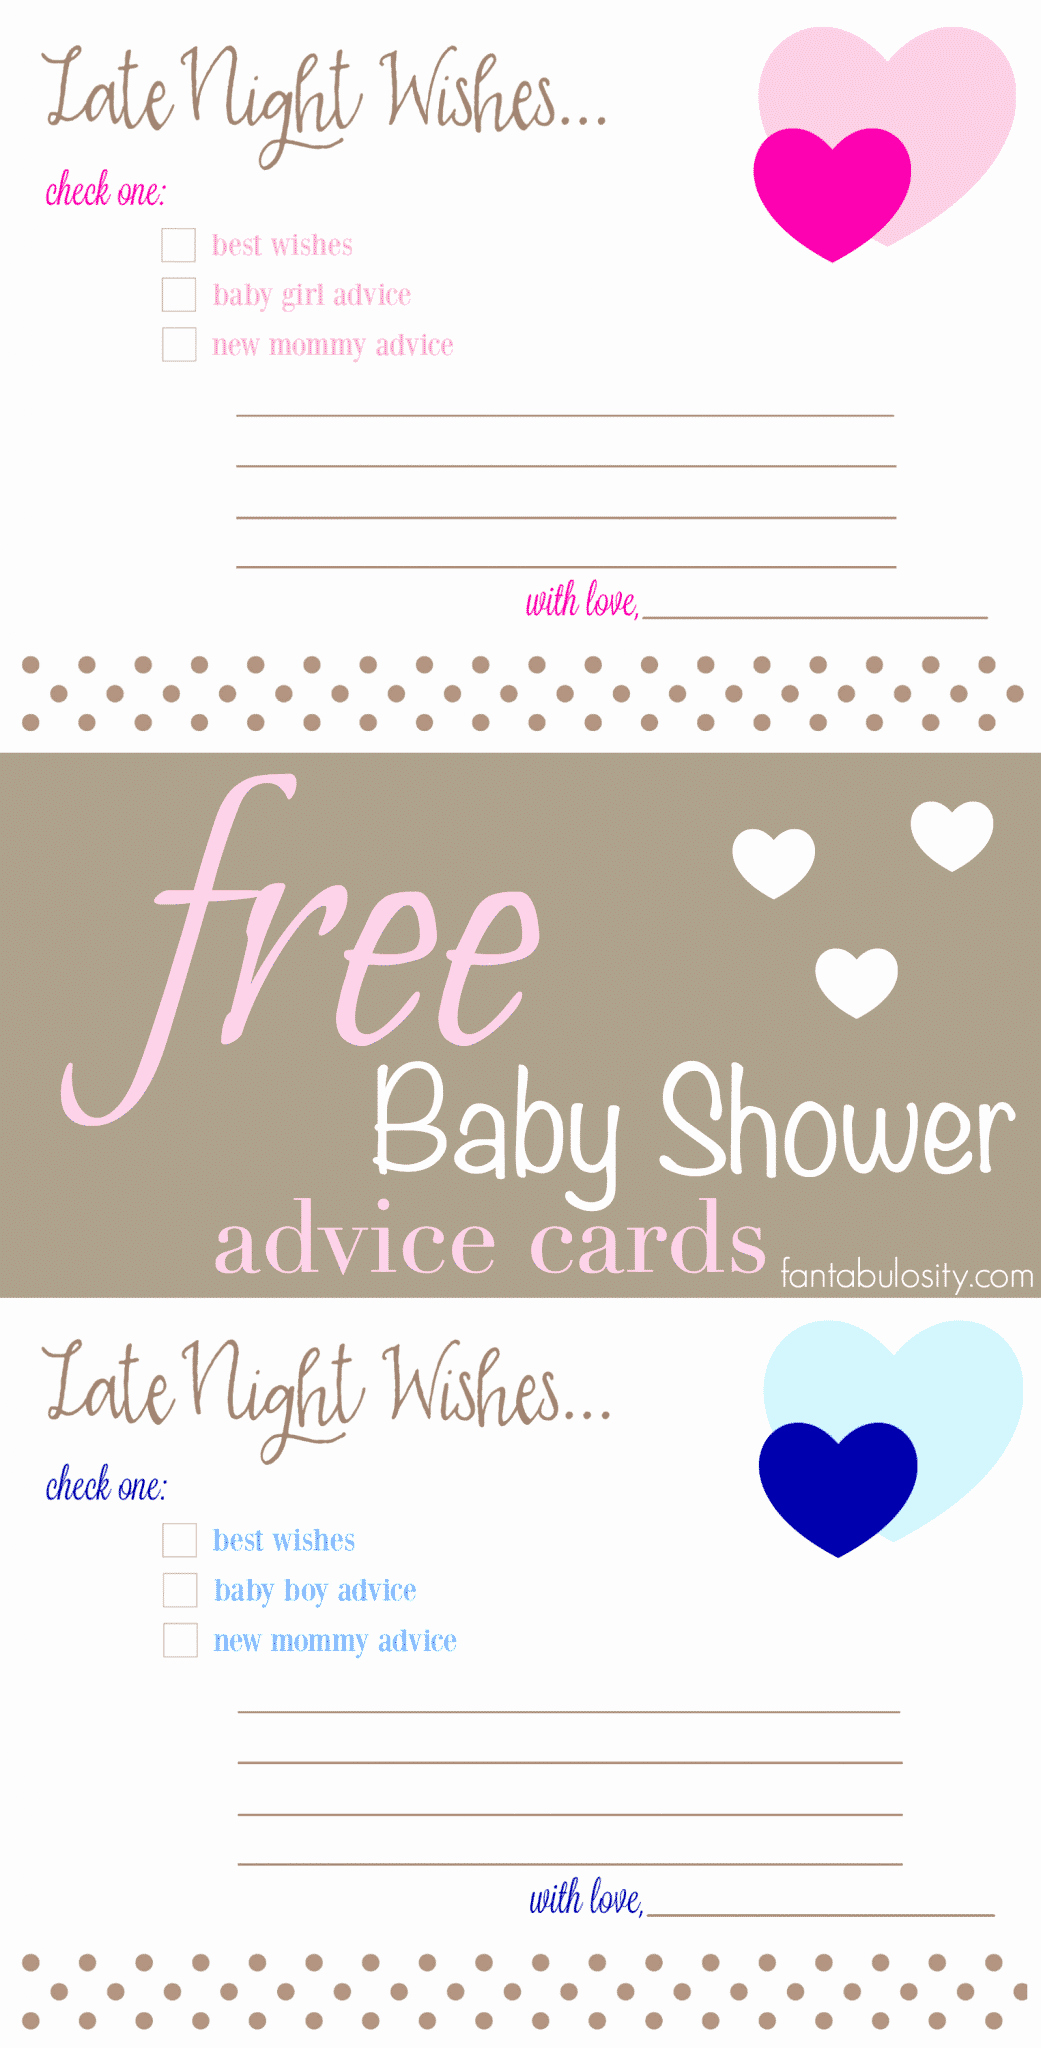 Printable Baby Shower Cards Beautiful Free Printable Baby Shower Advice &amp; Best Wishes Cards